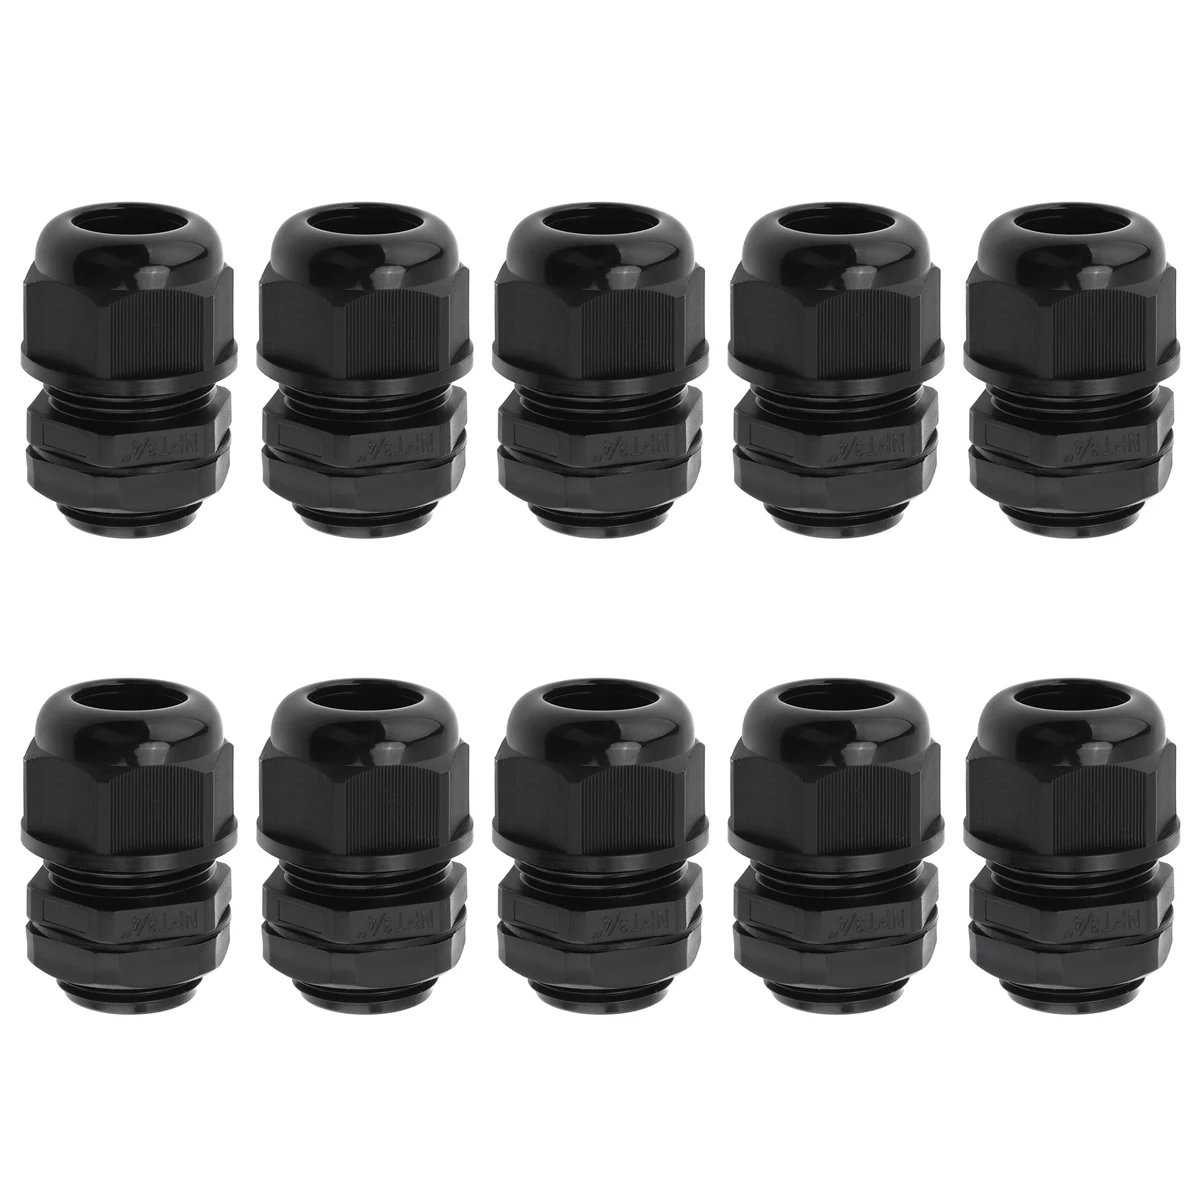 

10pcs 3/4 Inch NPT Cable Gland IP68 Nylon Strain Relief Waterproof Flame Retardant Connection Fixing Head